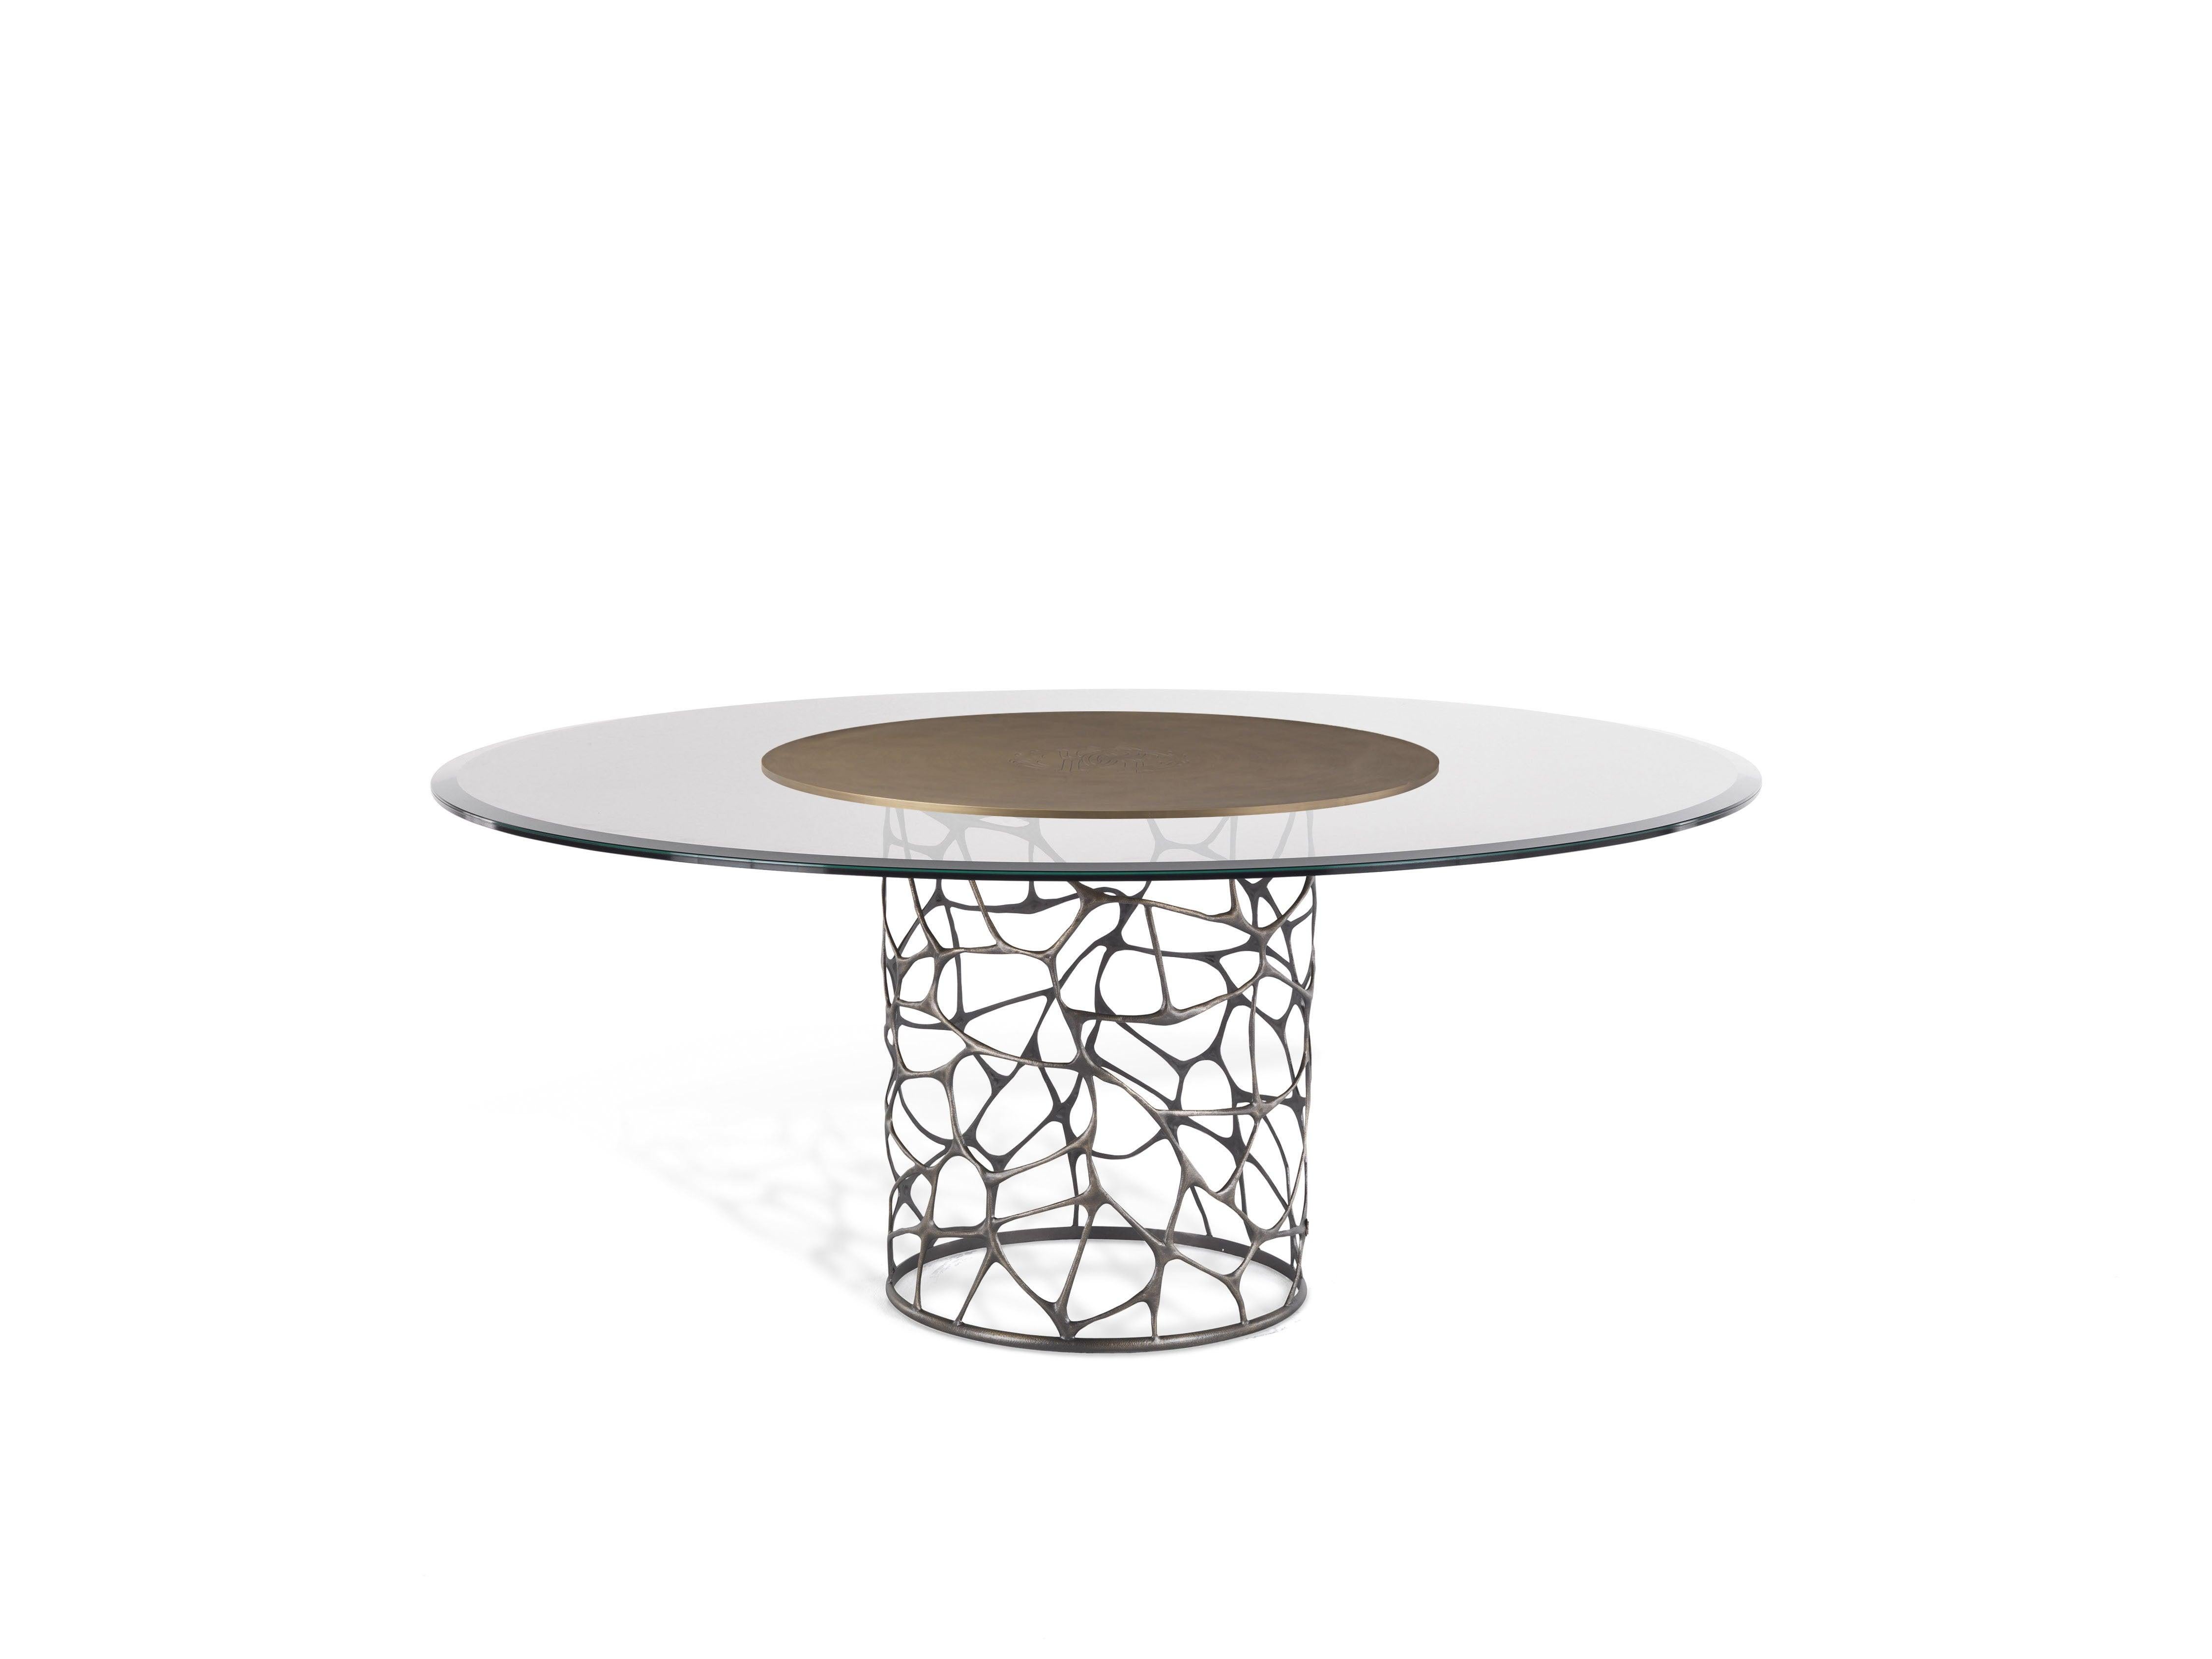 Sioraf Round Dining Table in Metal Base by Roberto Cavalli Home Interiors